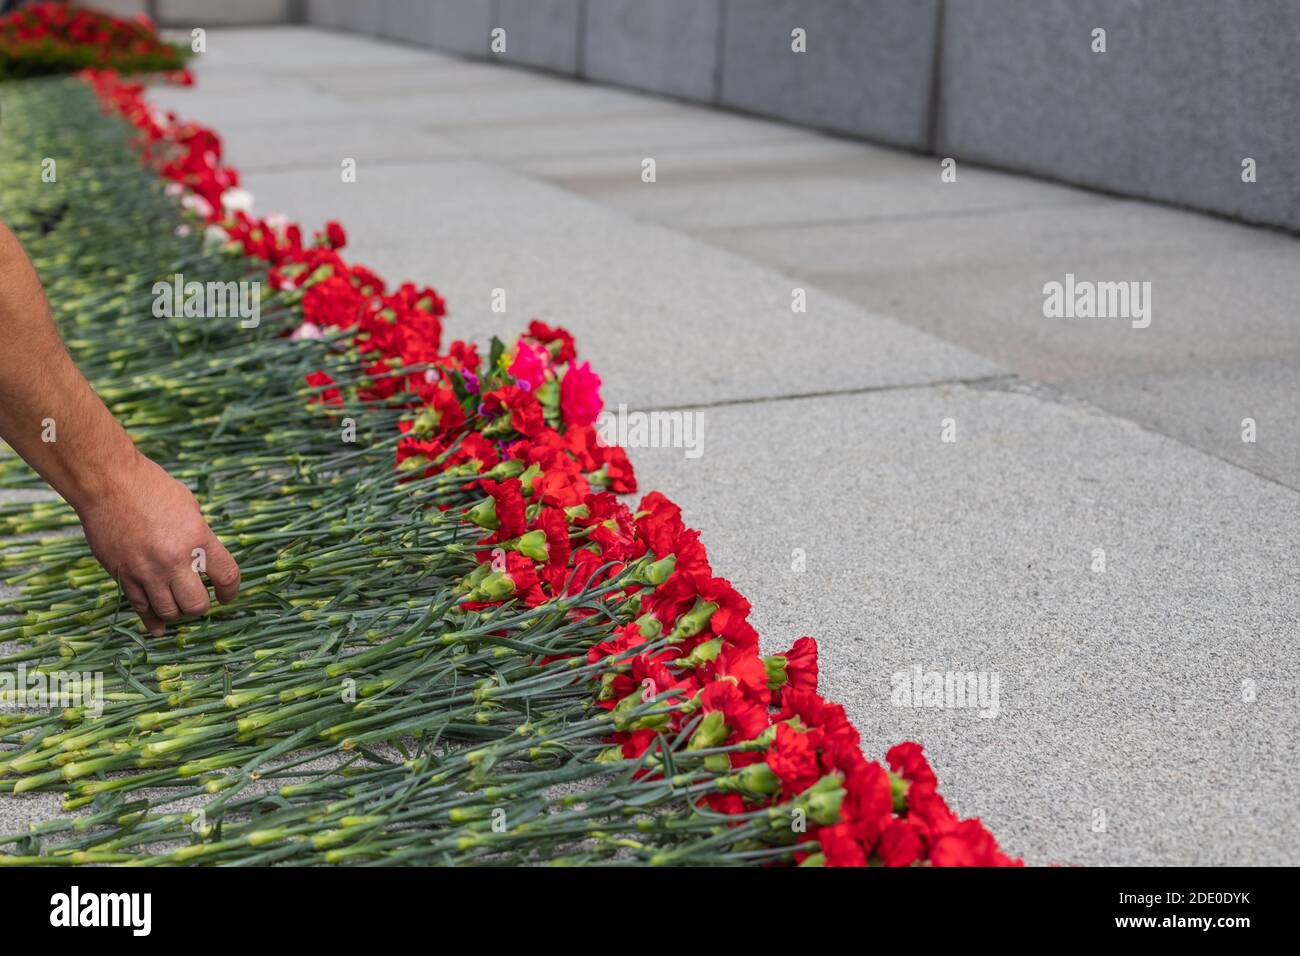 Laying a red carnation in memory of the dead. Hand close up Stock Photo